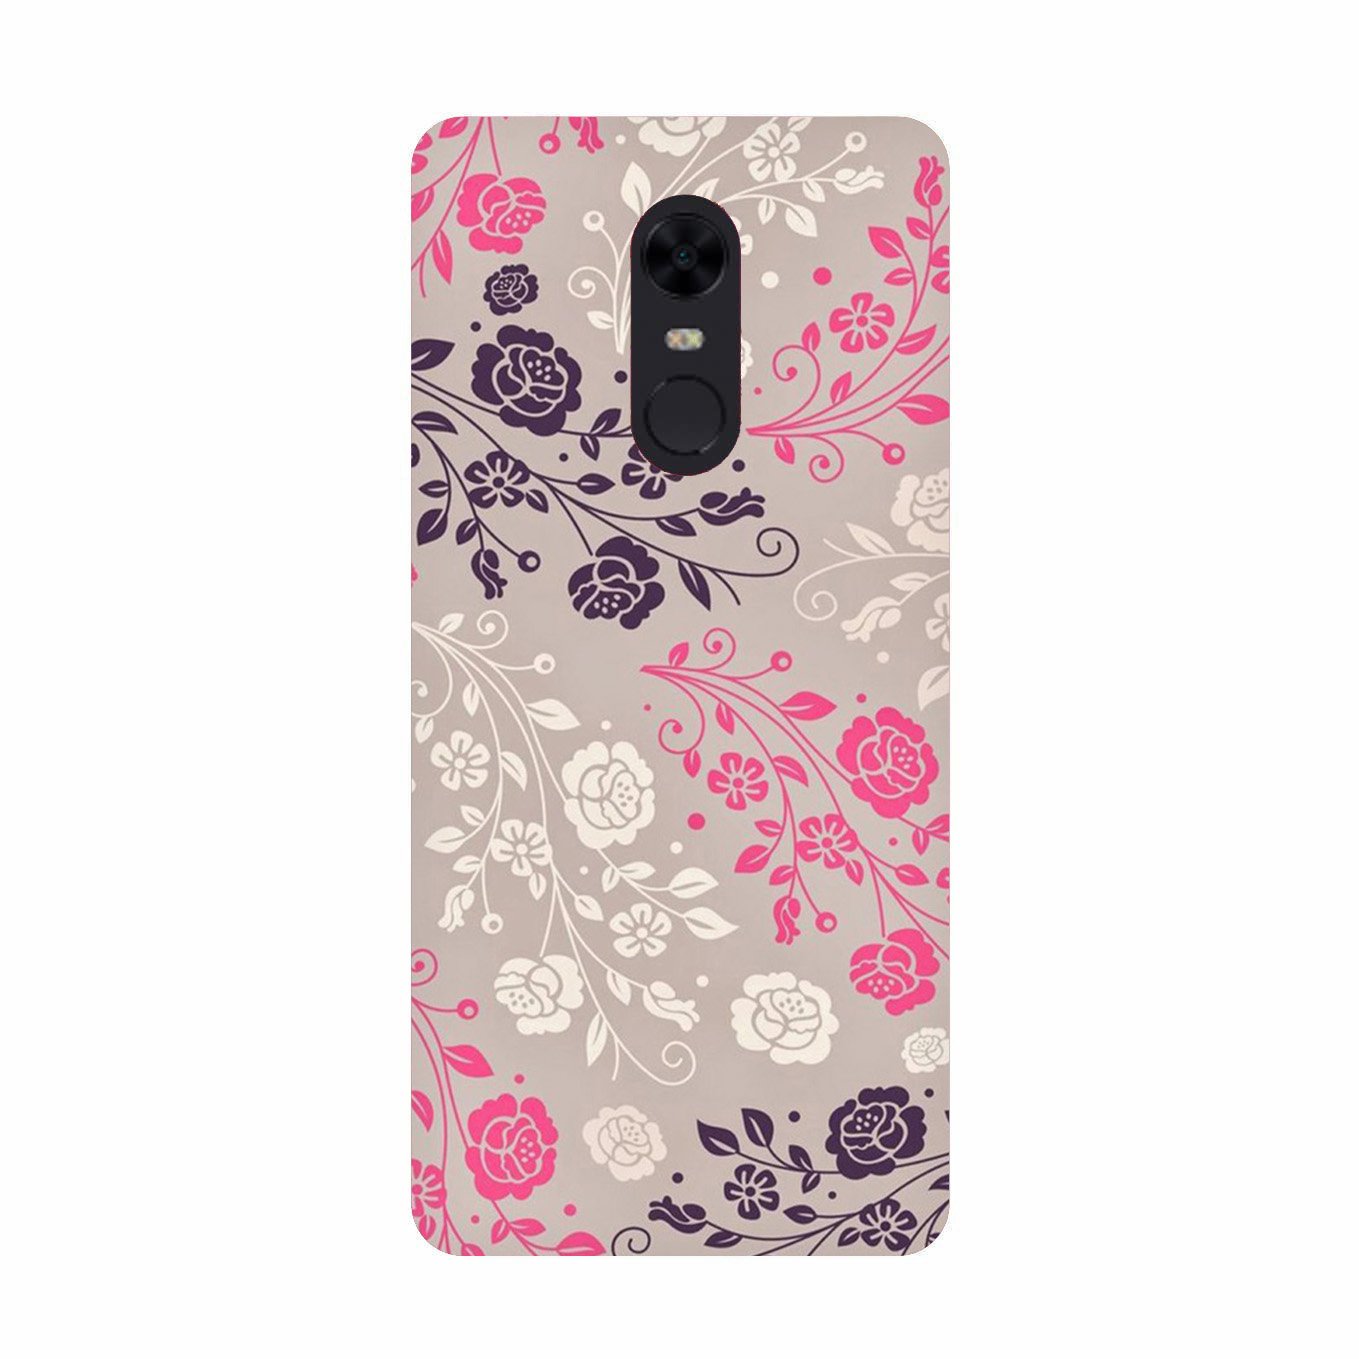 Pattern2 Case for Redmi Note 5